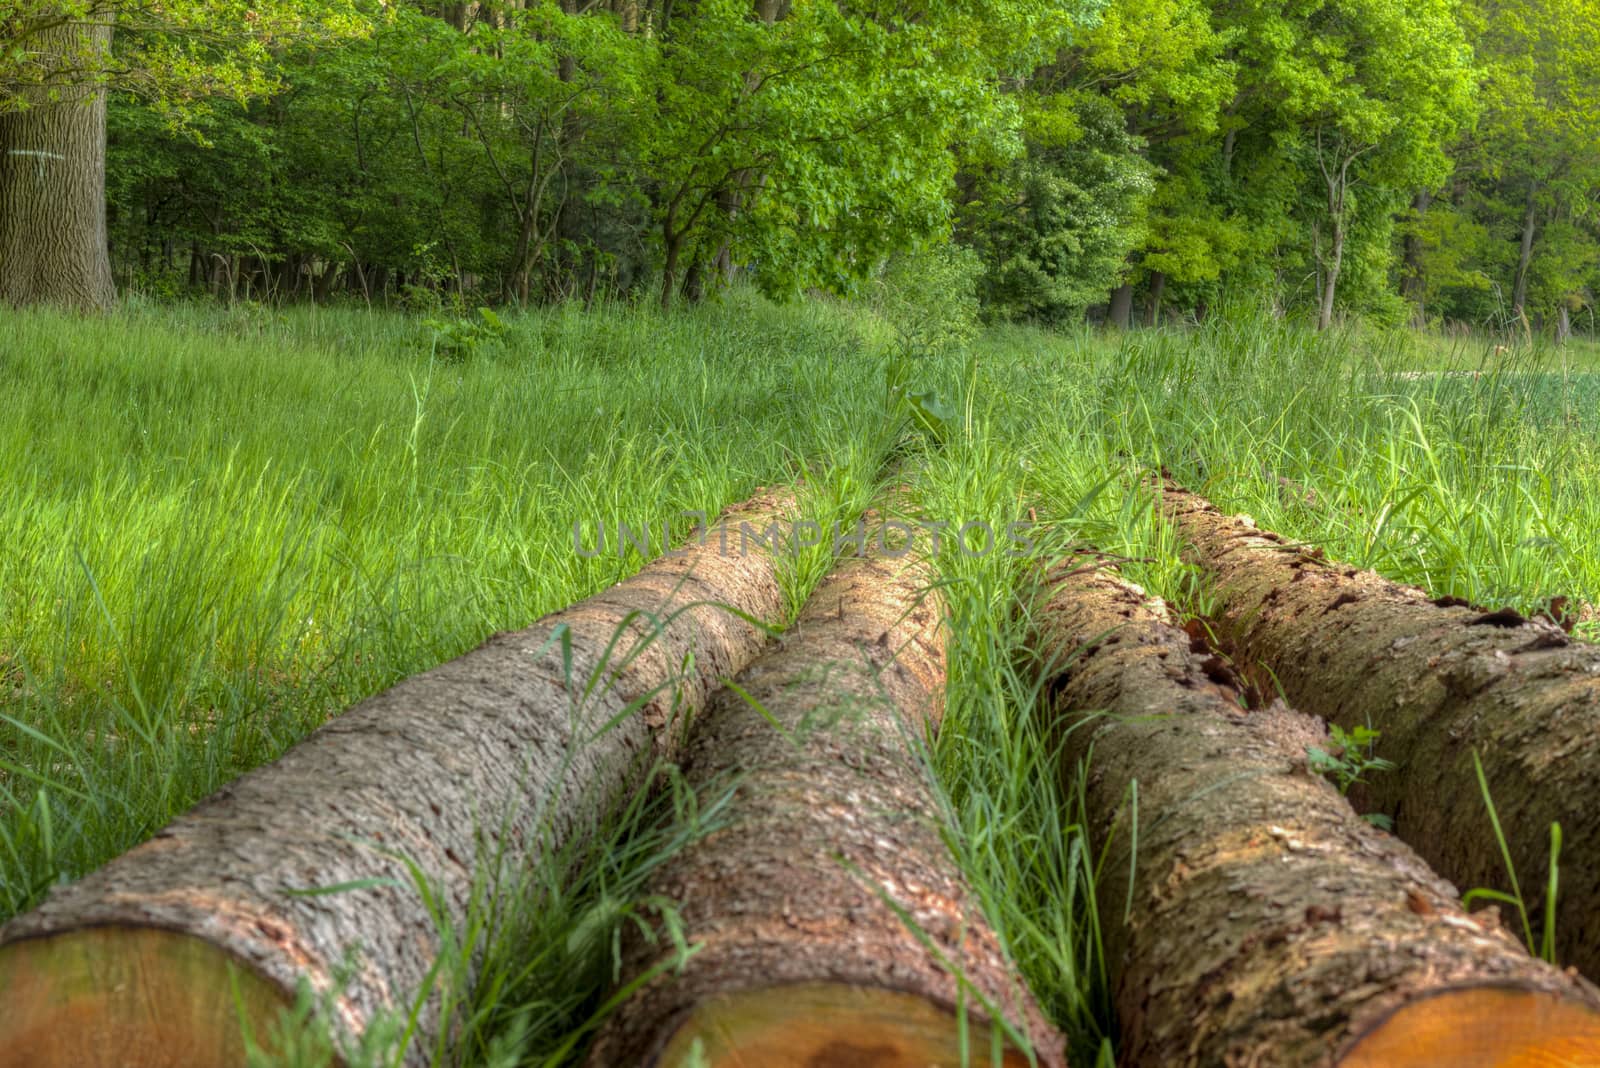 Germany: Logs In The Forest In Lower Saxony